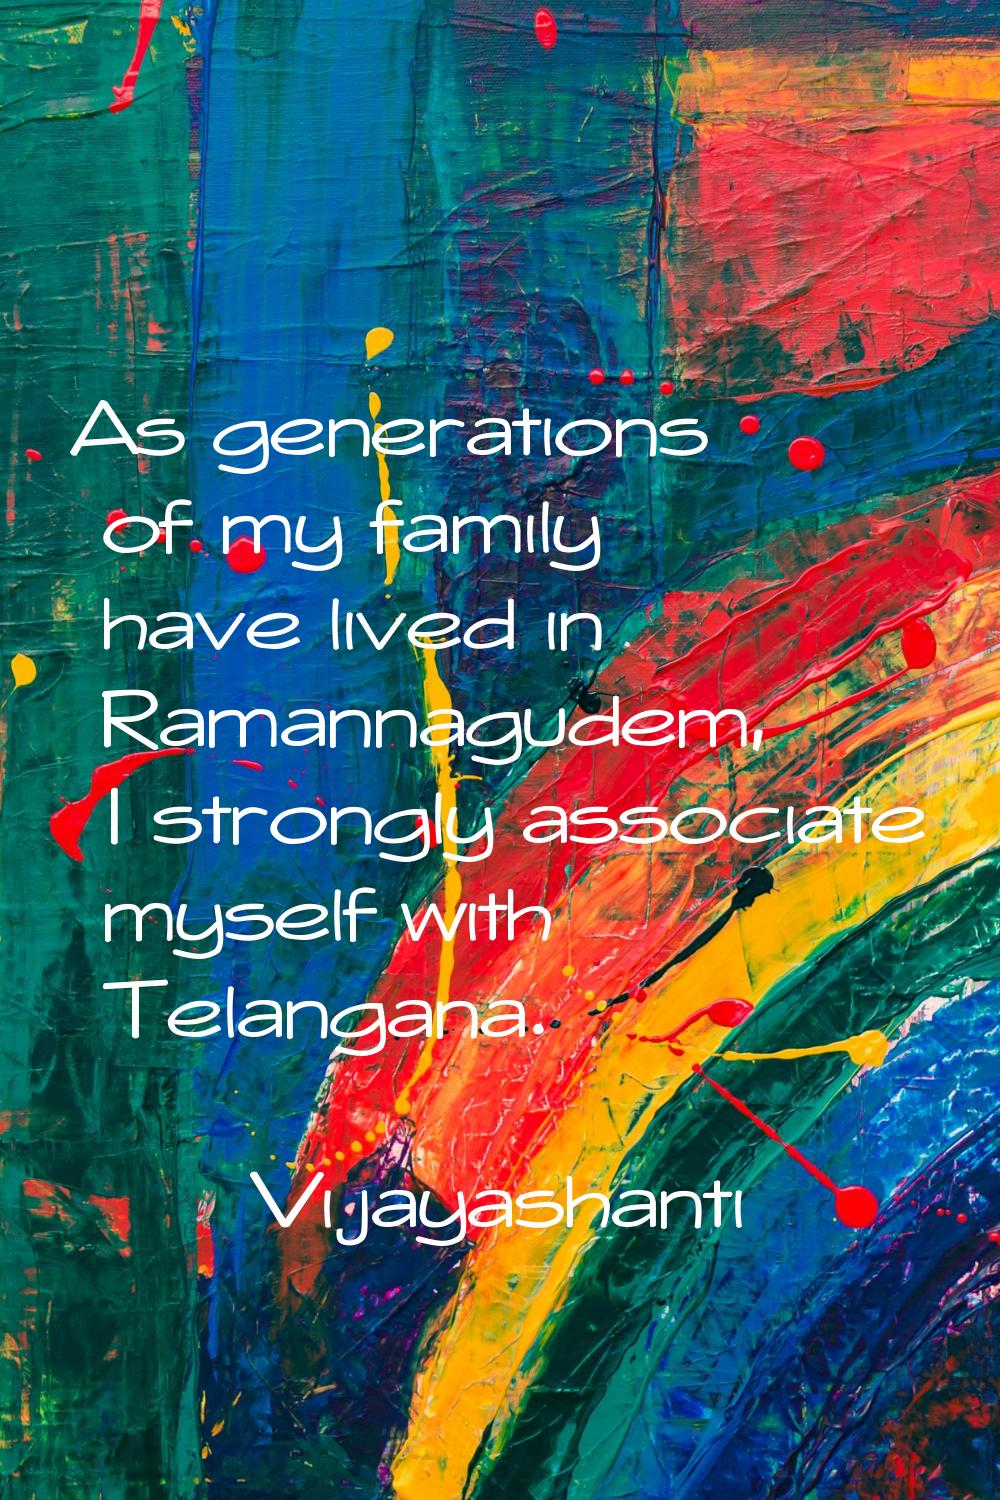 As generations of my family have lived in Ramannagudem, I strongly associate myself with Telangana.